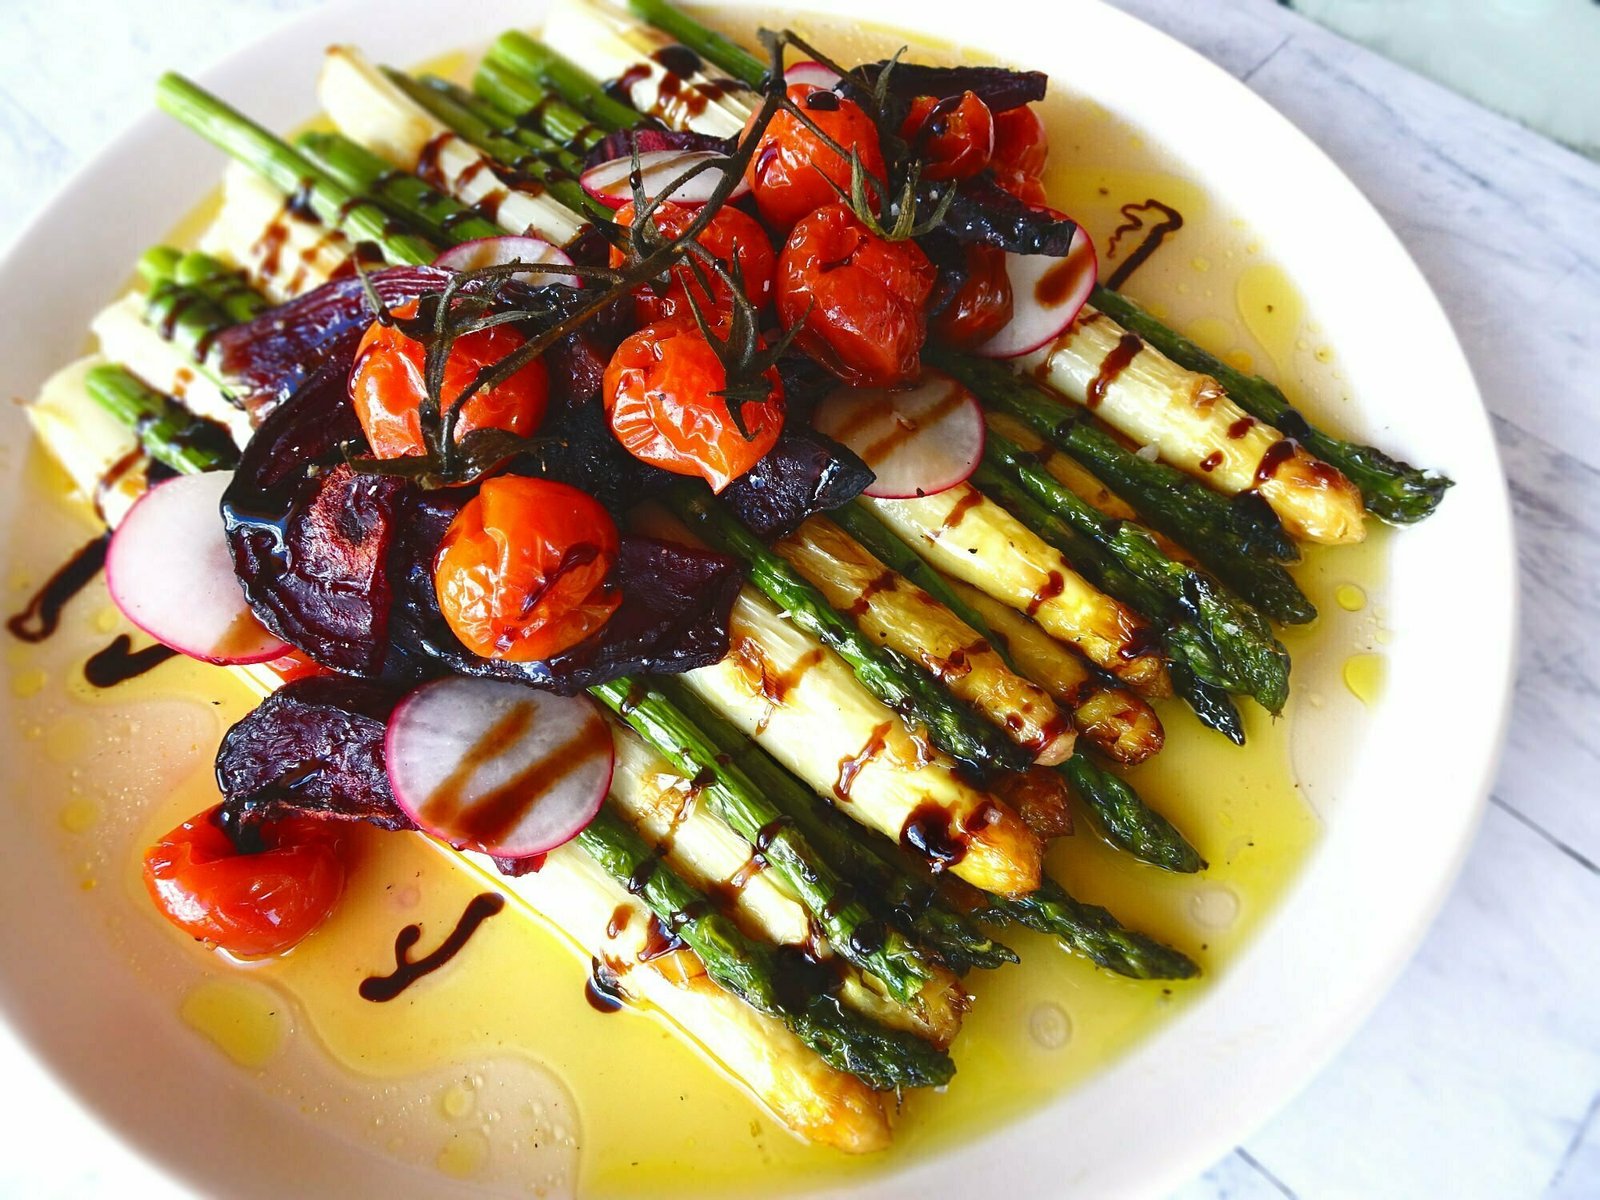 A large white plate sits loaded with a stack of roasted asparagus, and caramelized red onions.